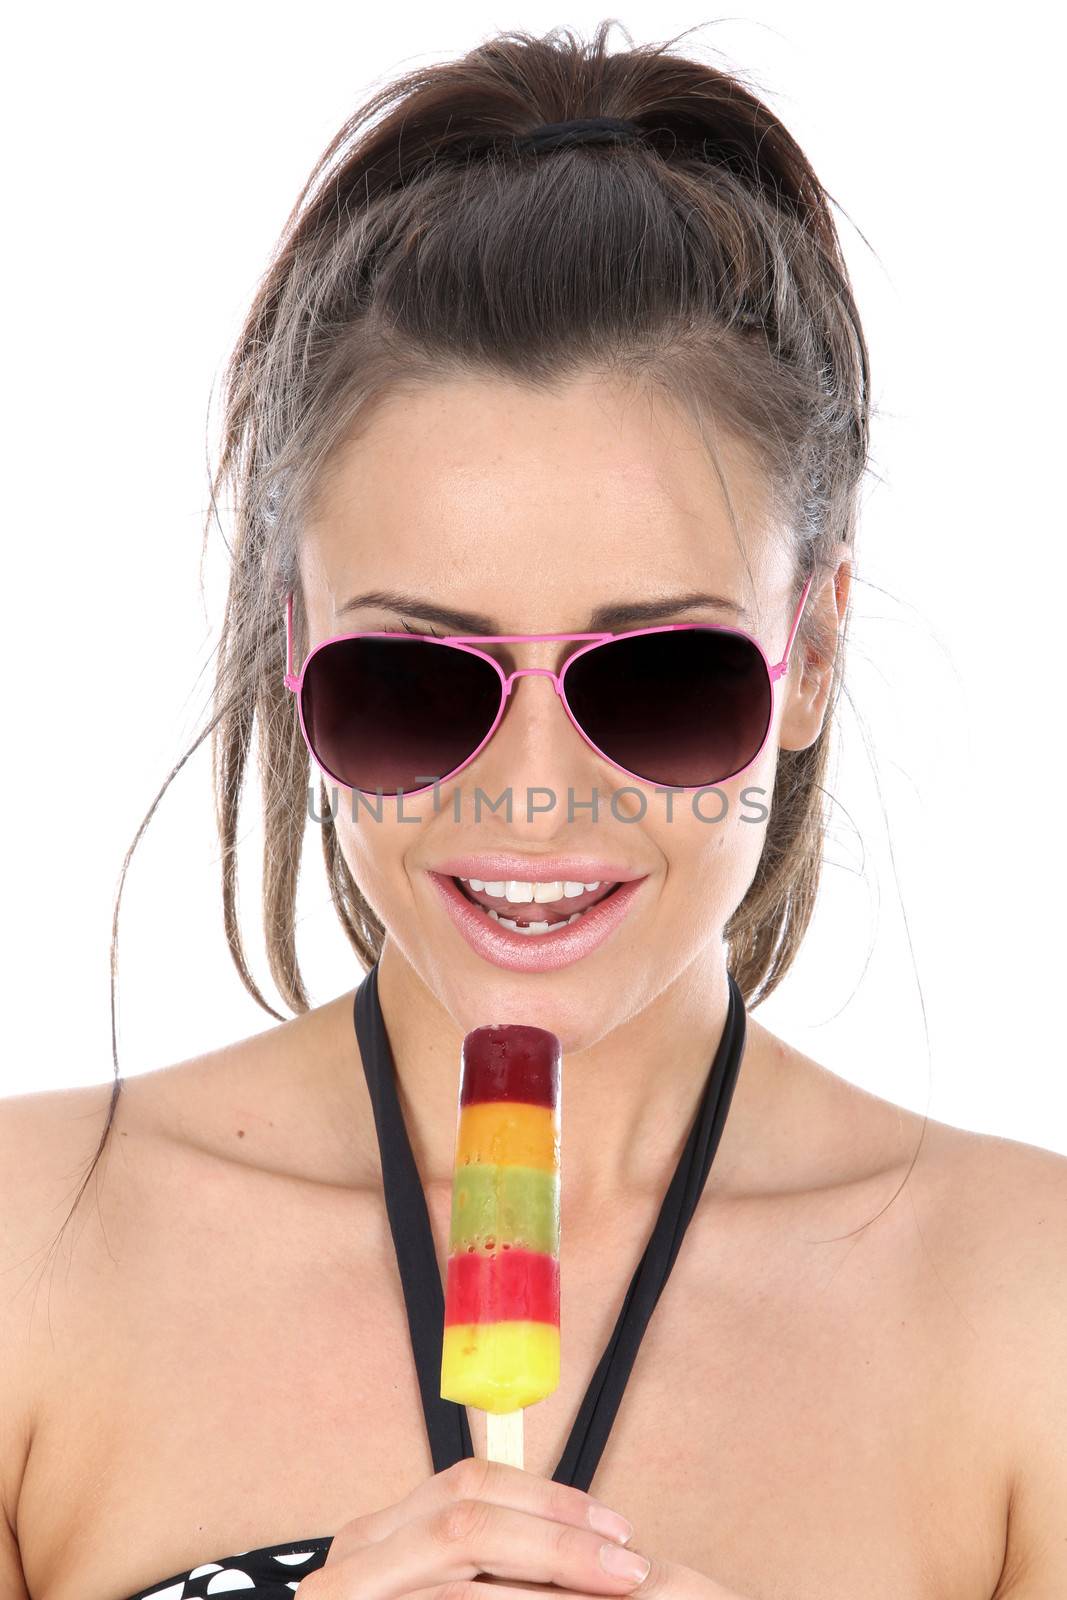 Model Released. Woman Eating Ice lolly